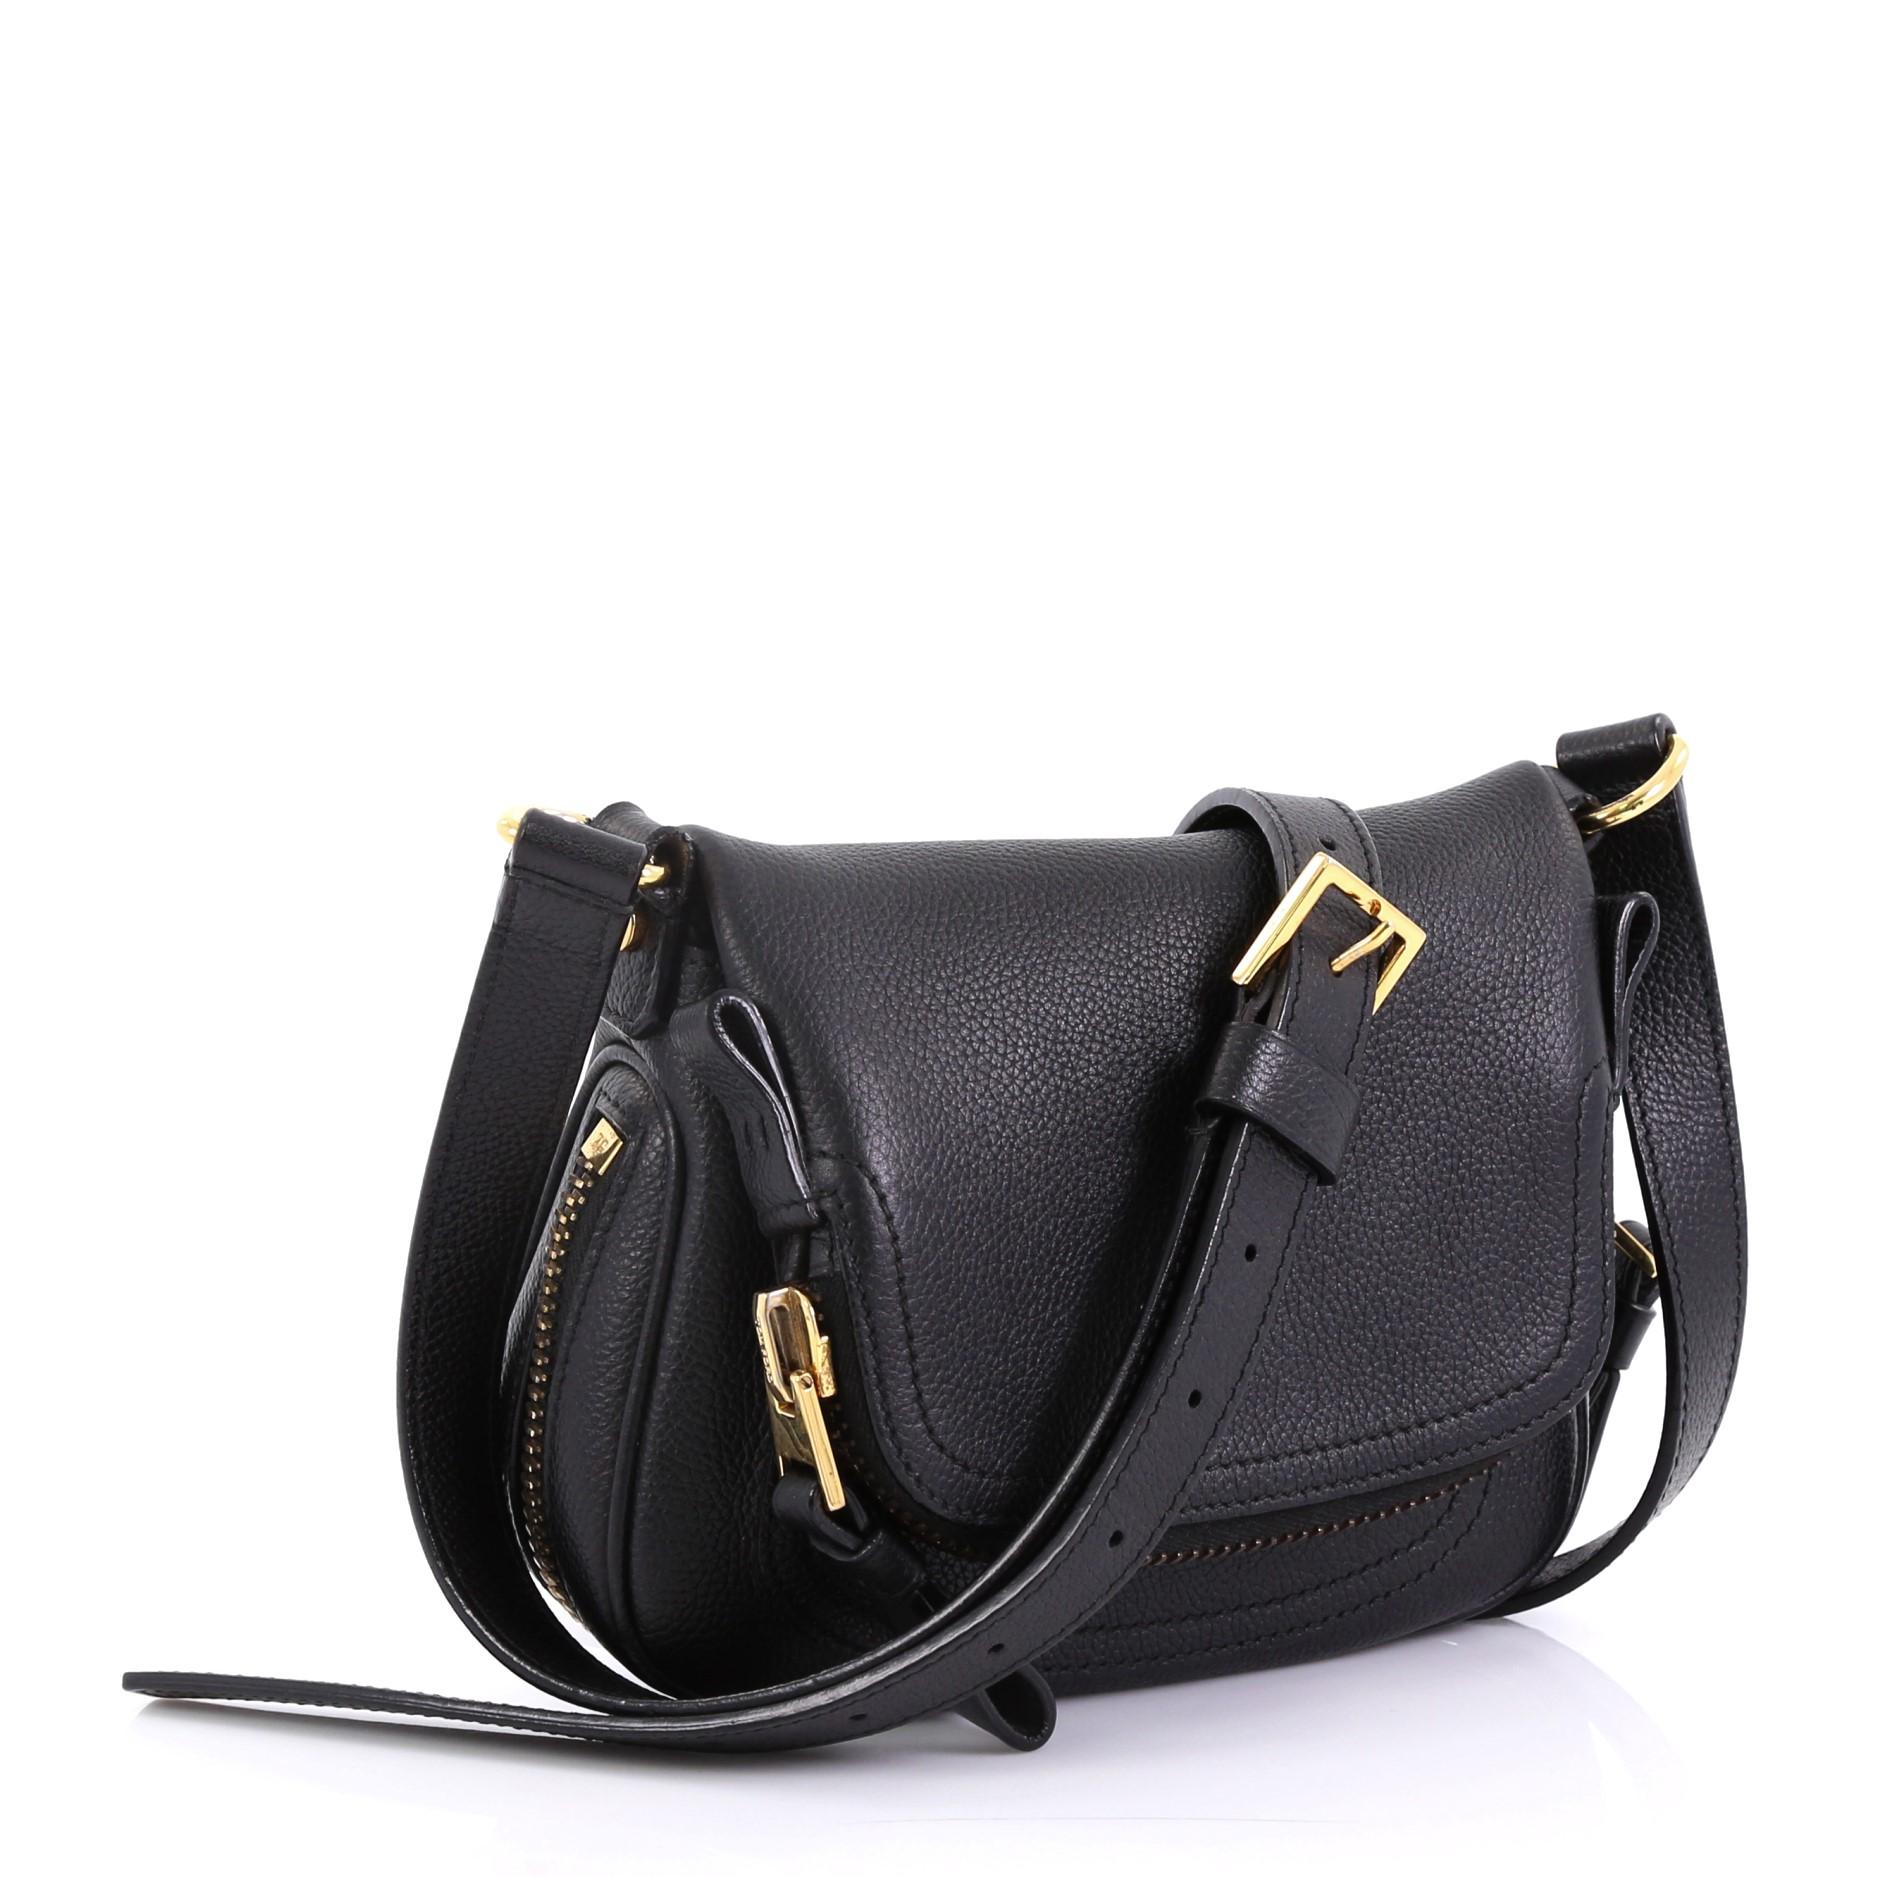 This Tom Ford Jennifer Crossbody Bag Leather Mini, crafted in black leather, features an adjustable crossbody strap, zip-top fold-over flap, and gold-toned hardware. Its zip closure opens to a black microfiber interior with side zip